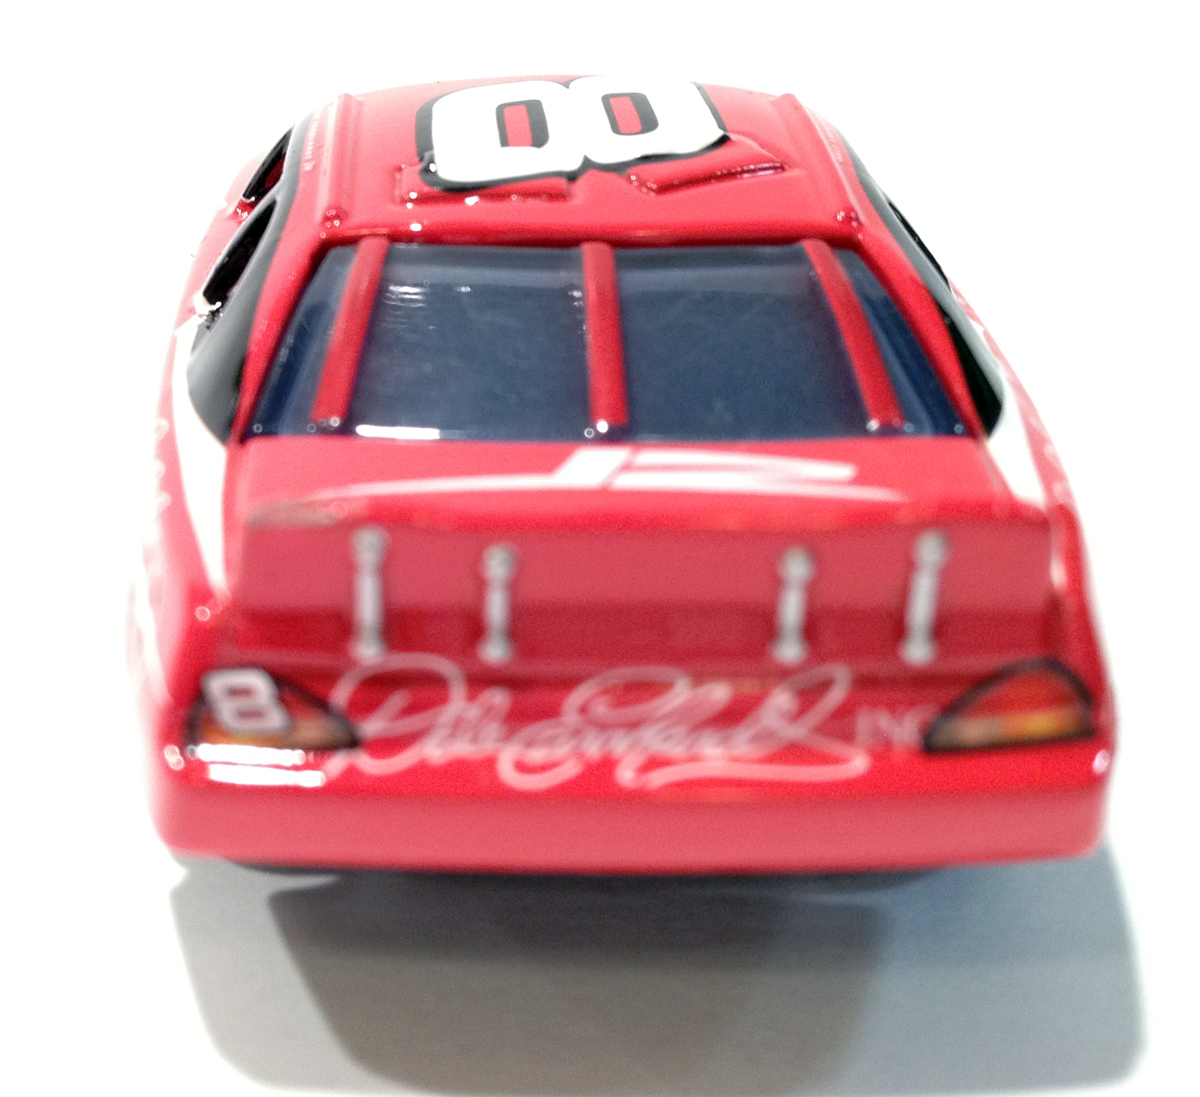 Collecting Cars: Piston Cup Race Cars